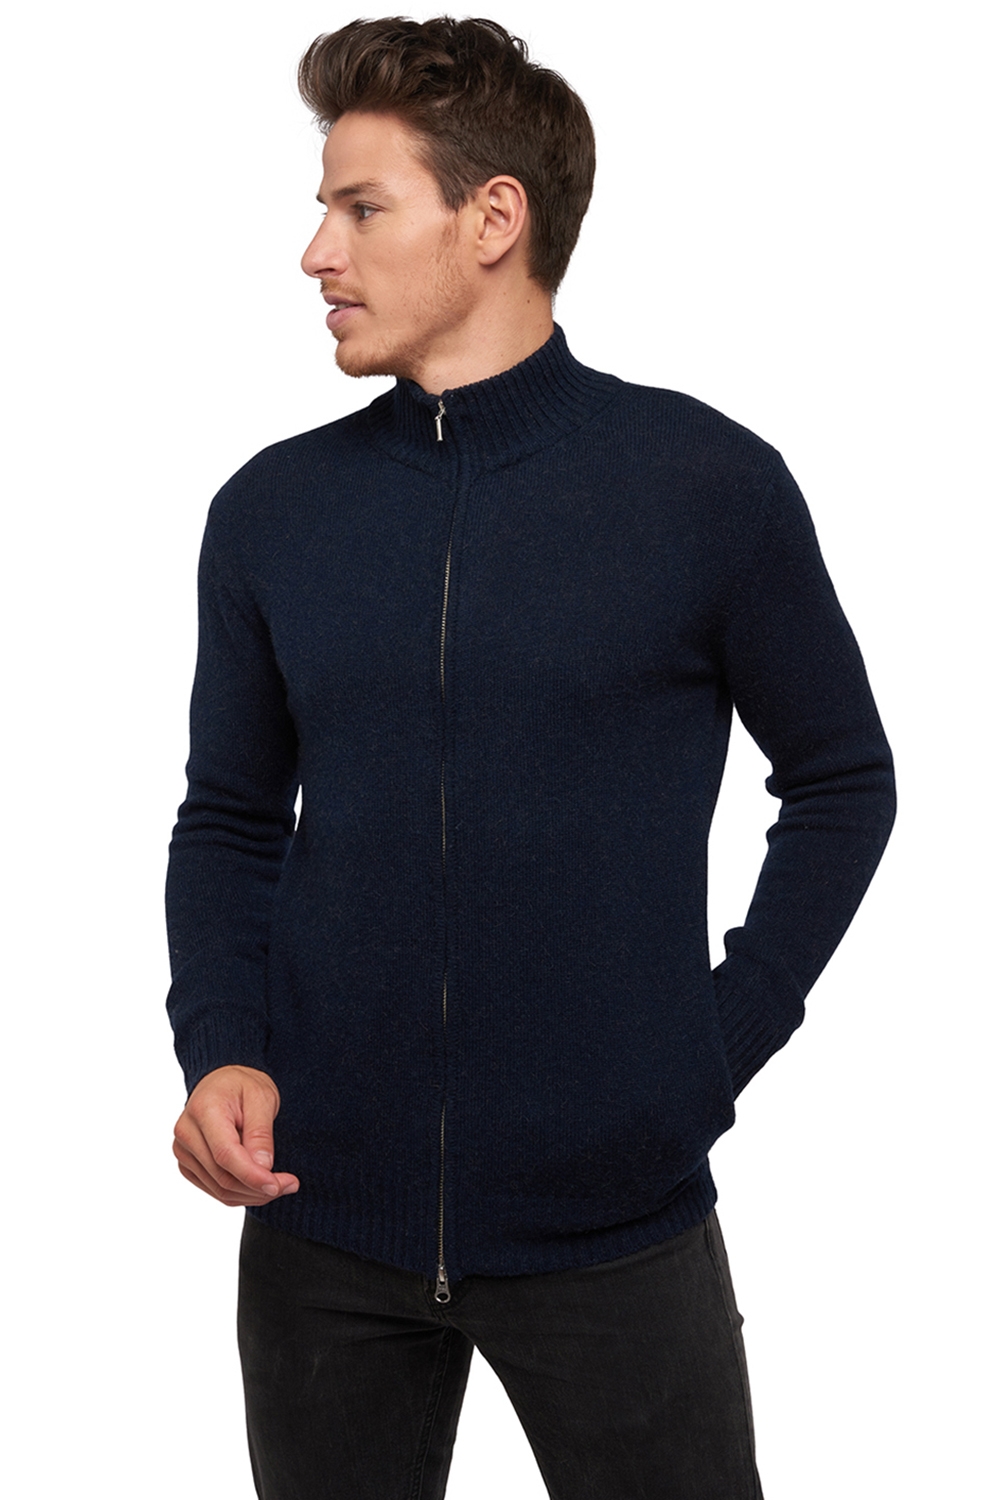 Chameau pull homme clyde marine xl